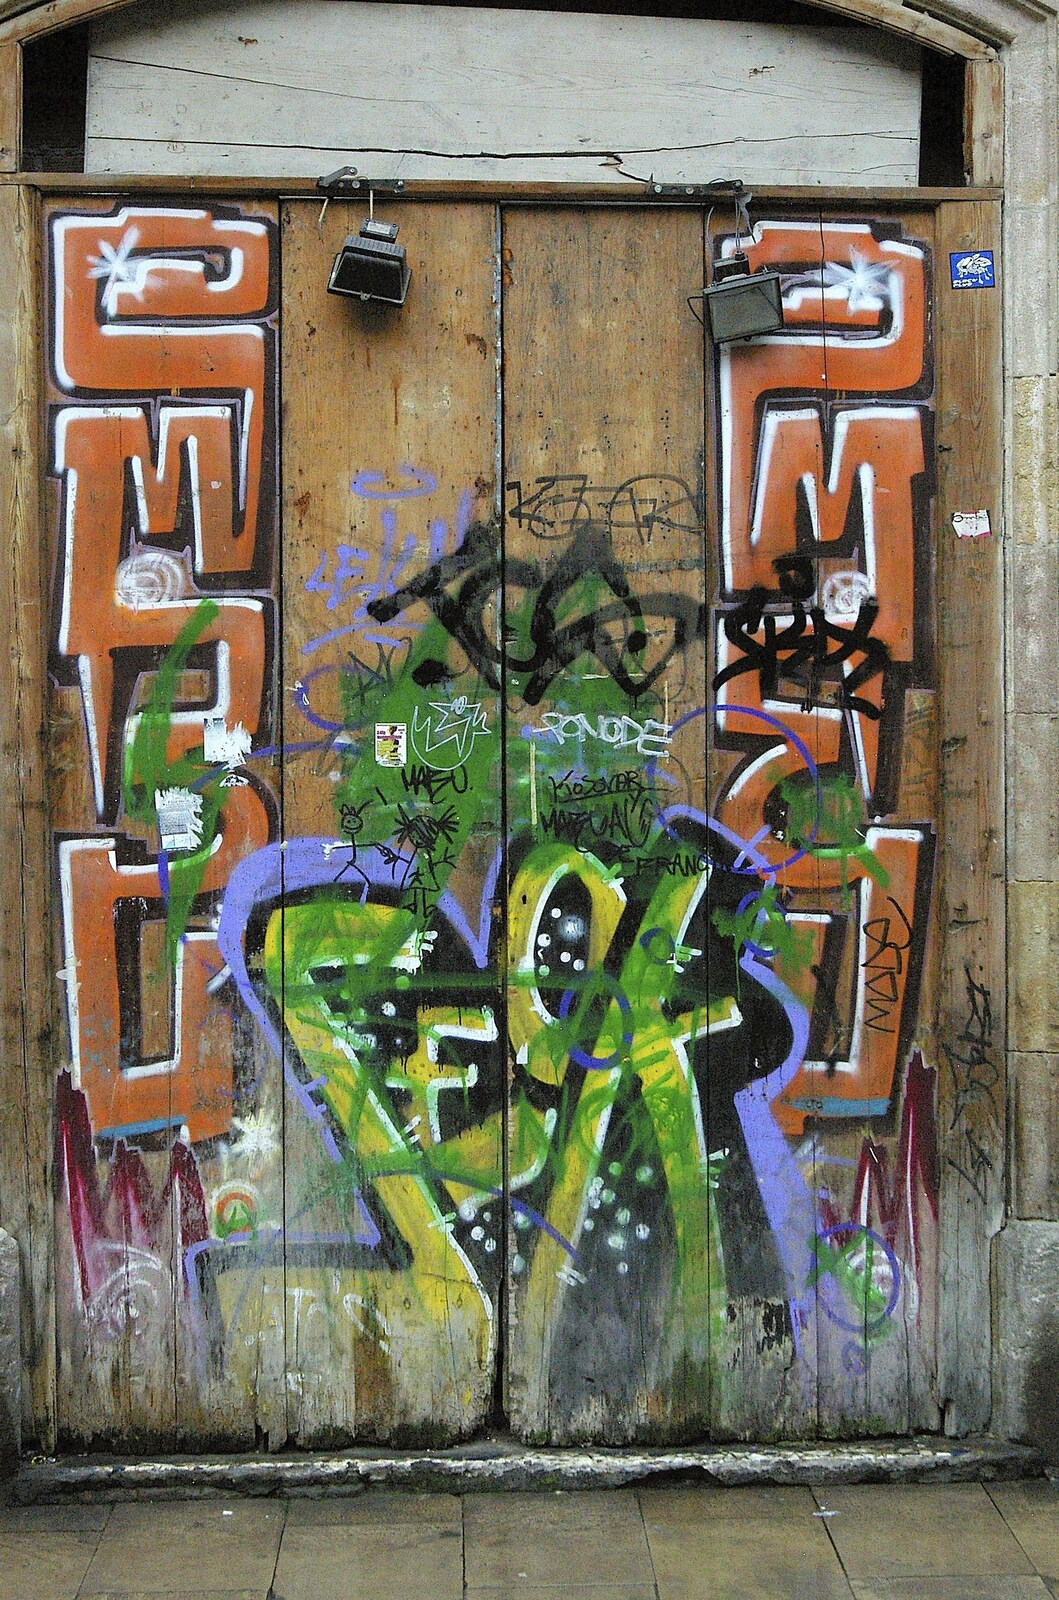 A heavily-graffiti'd doorway from Two Days in Barcelona, Catalunya, Spain - 22nd September 2006